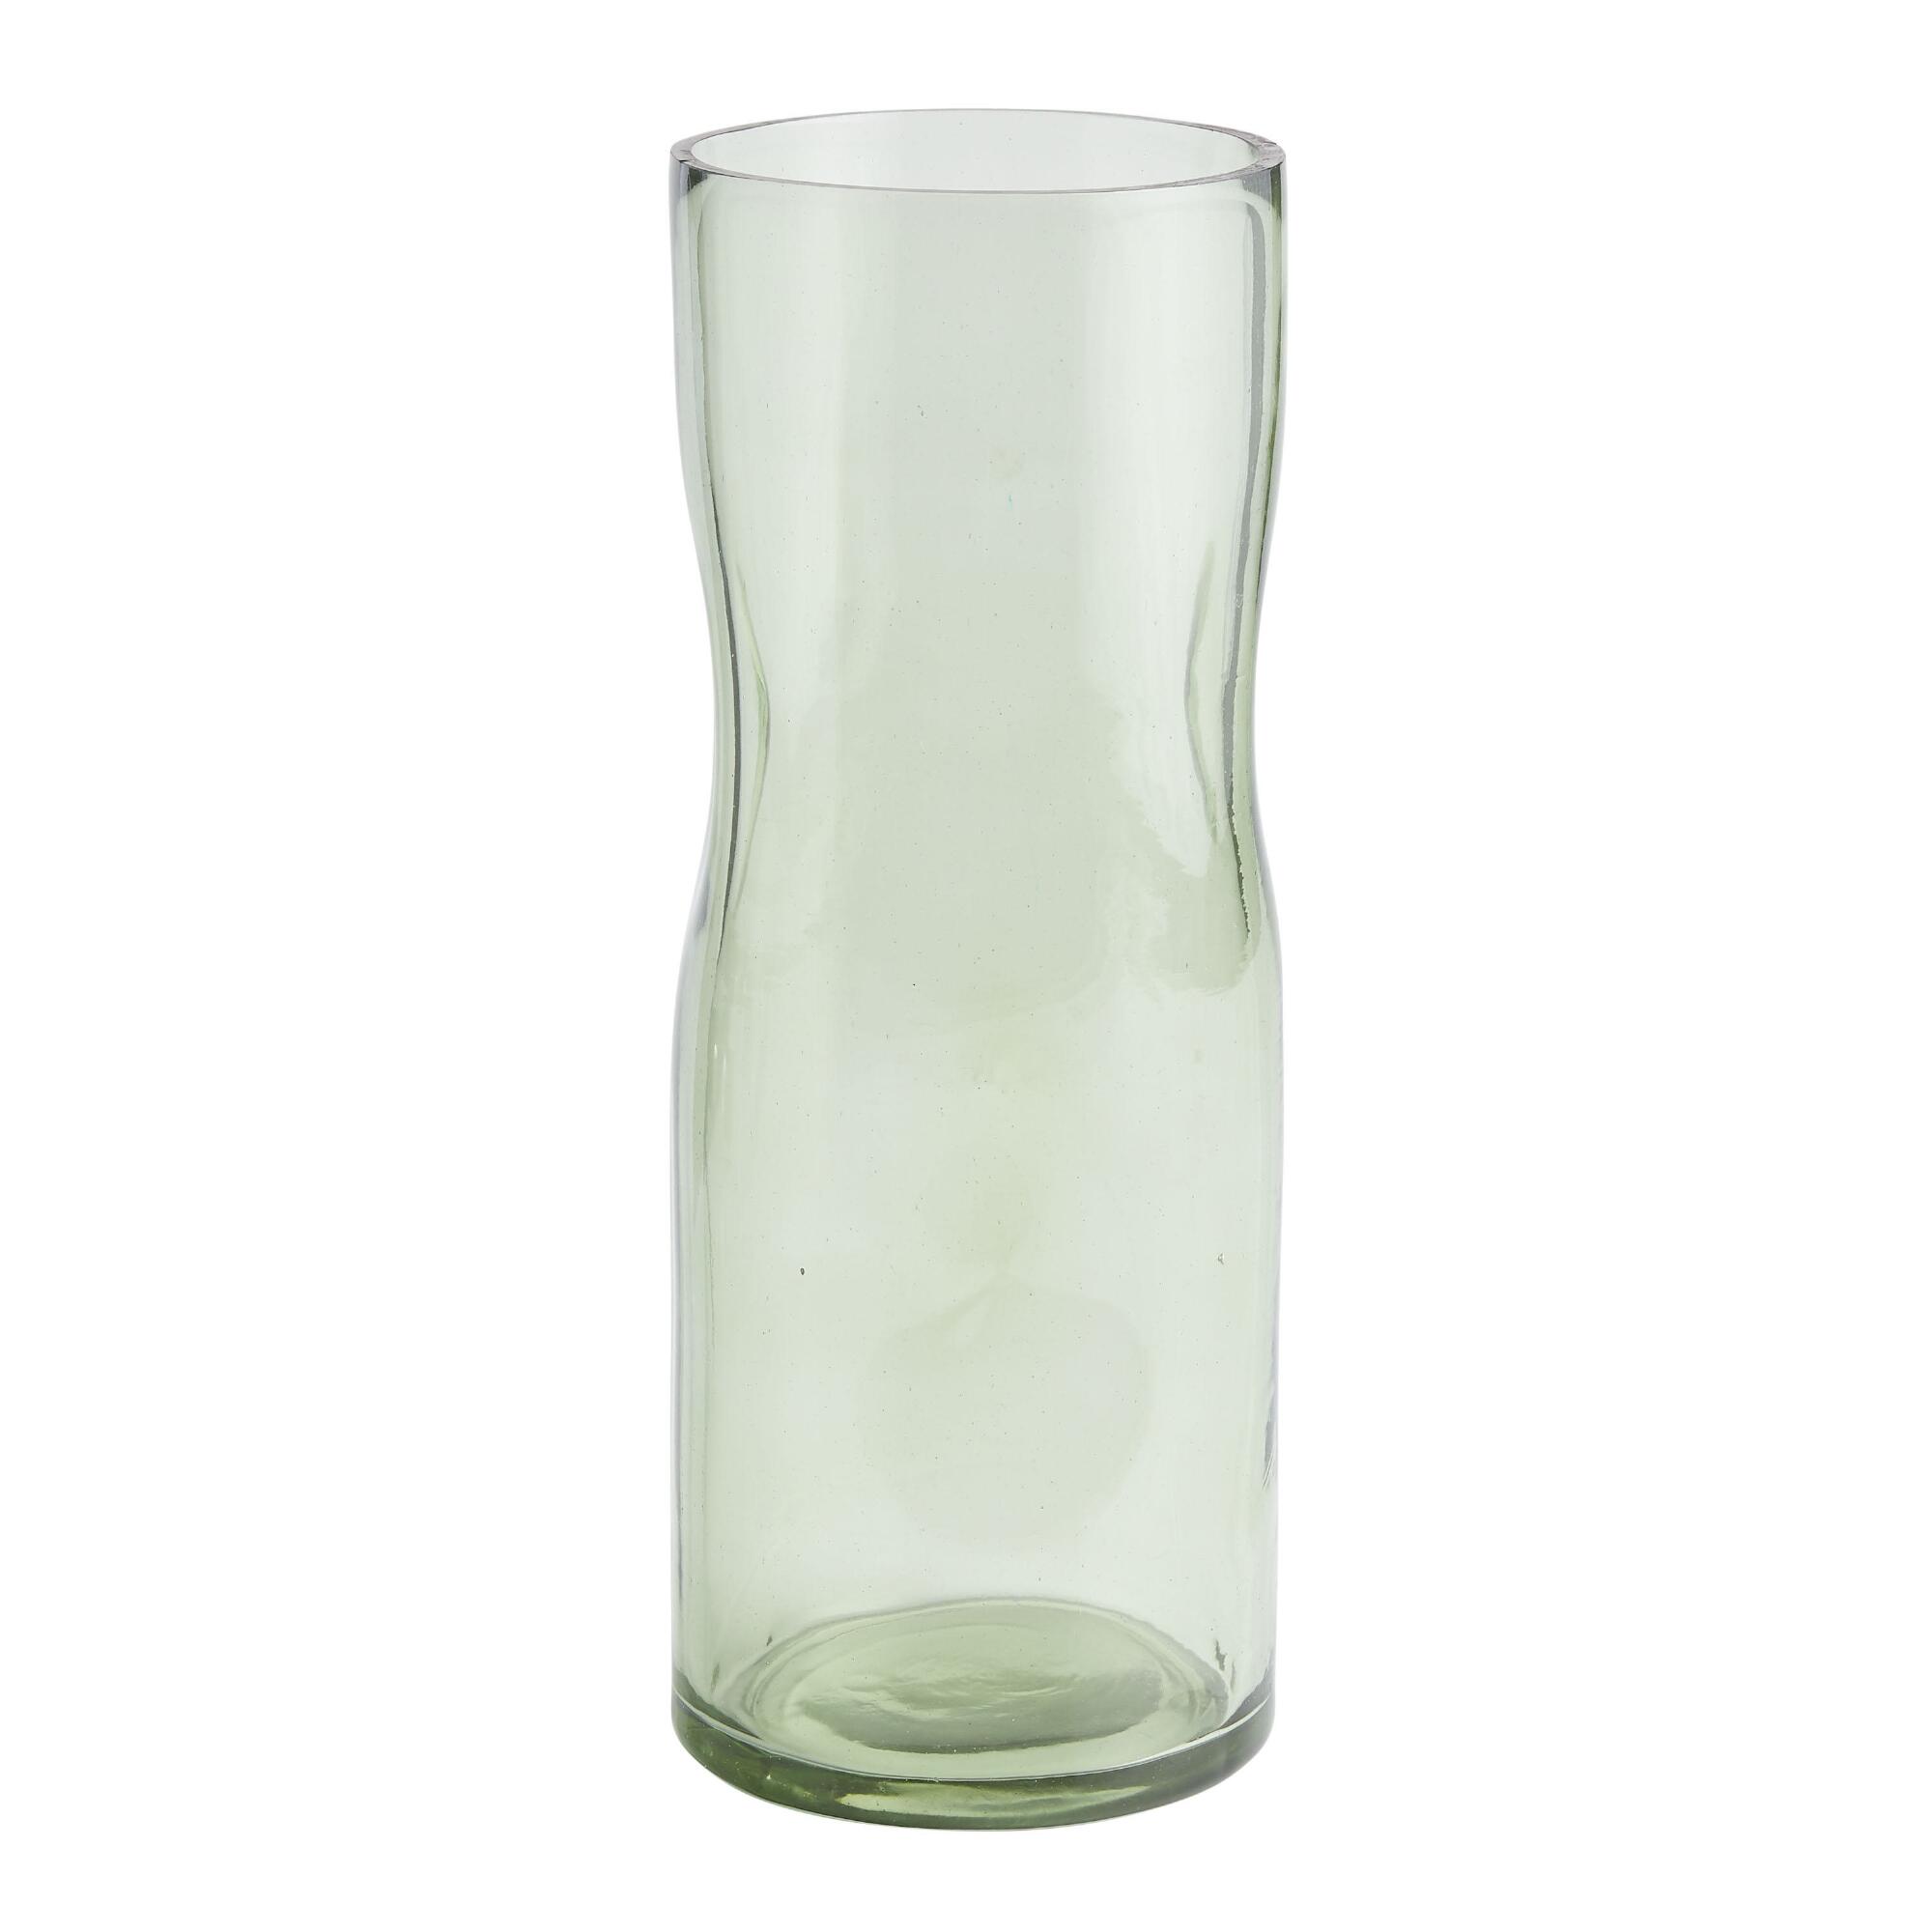 Tall Green Recycled Glass Thumbprint Vase by World Market